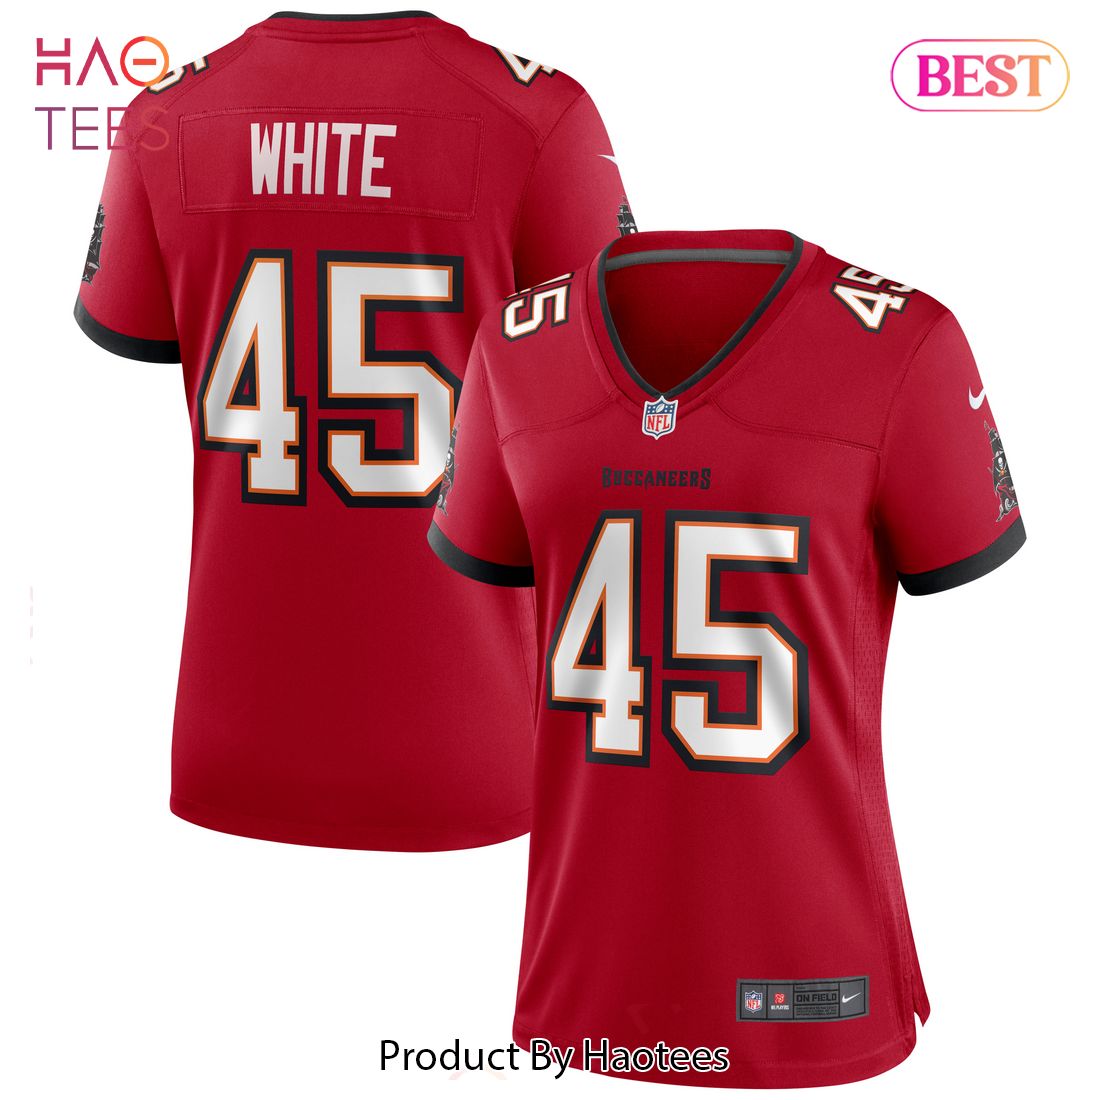 Devin White Tampa Bay Buccaneers Nike Women’s Game Jersey Red